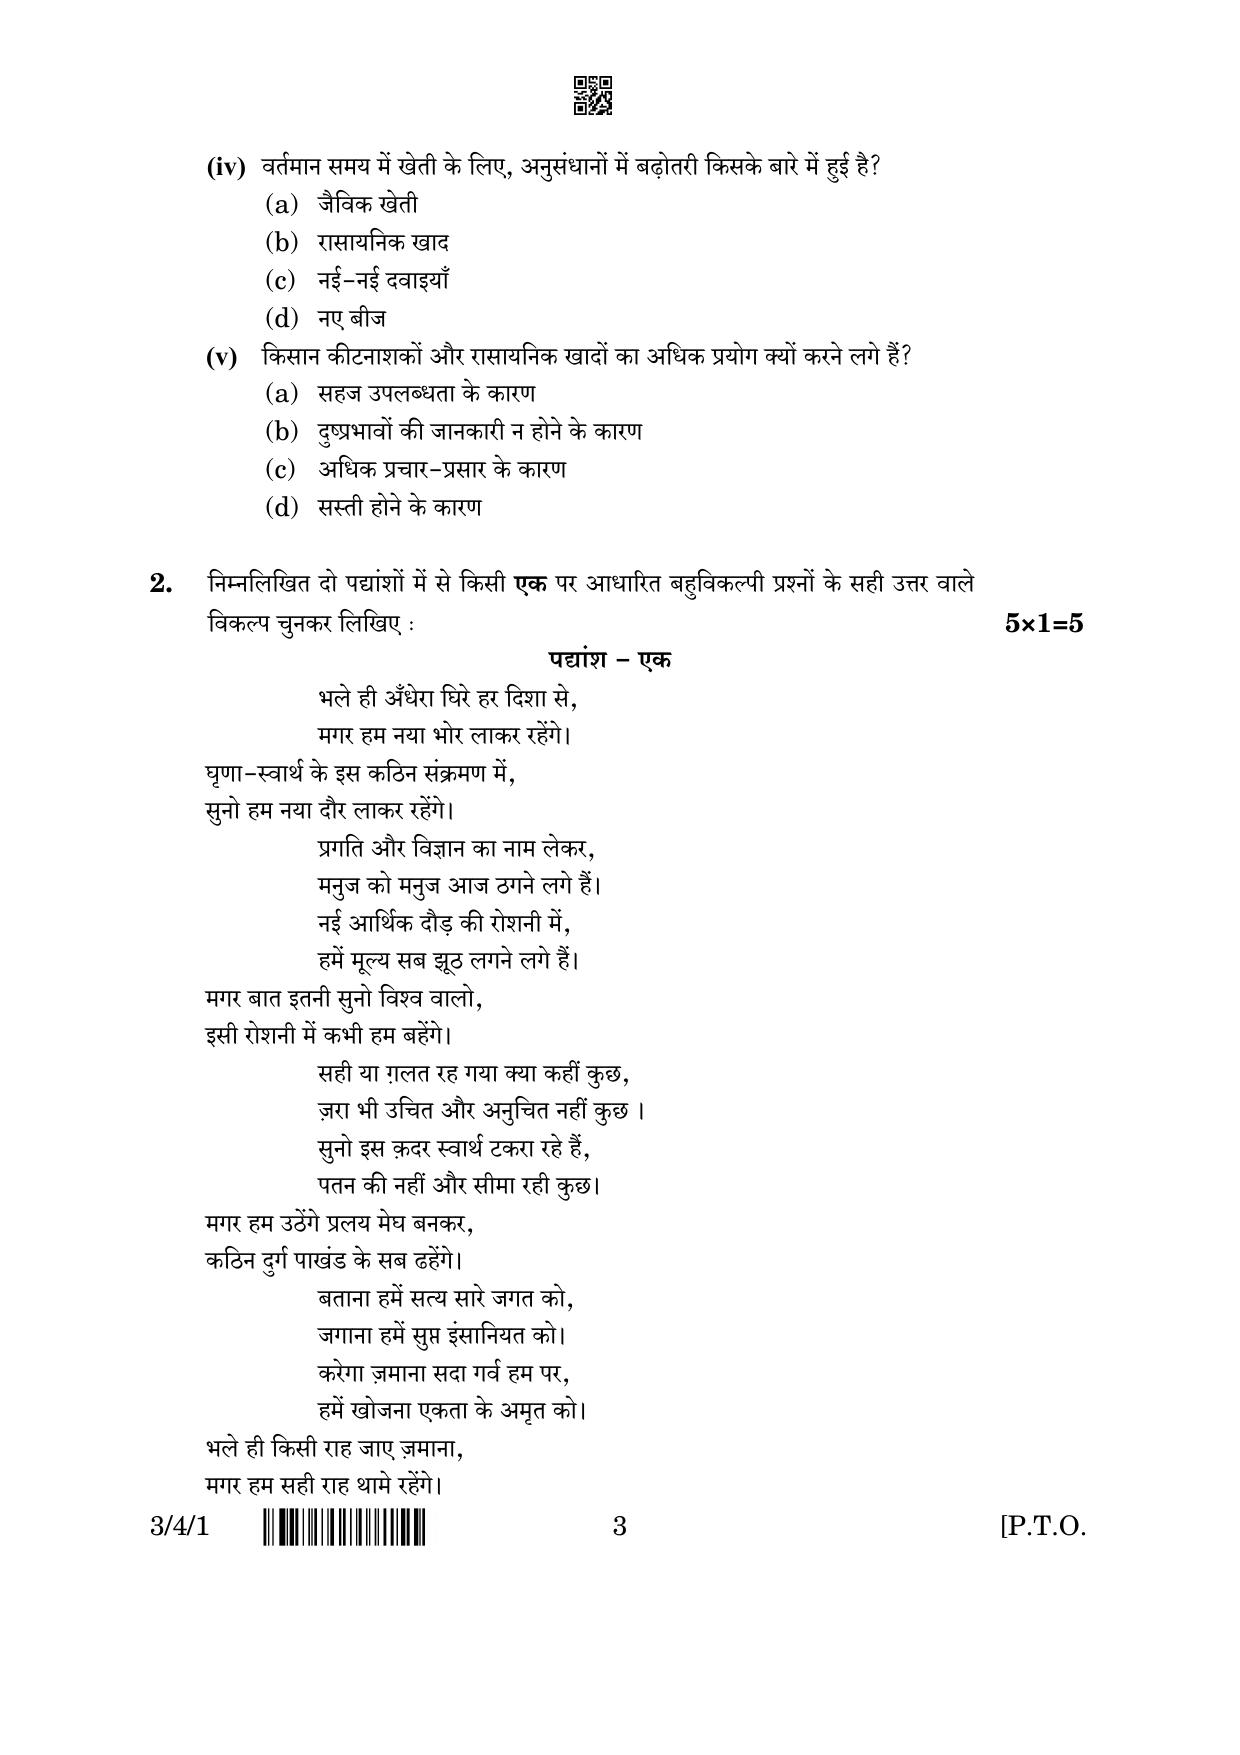 CBSE Class 10 3-4-1 Hindi A 2023 Question Paper - Page 3